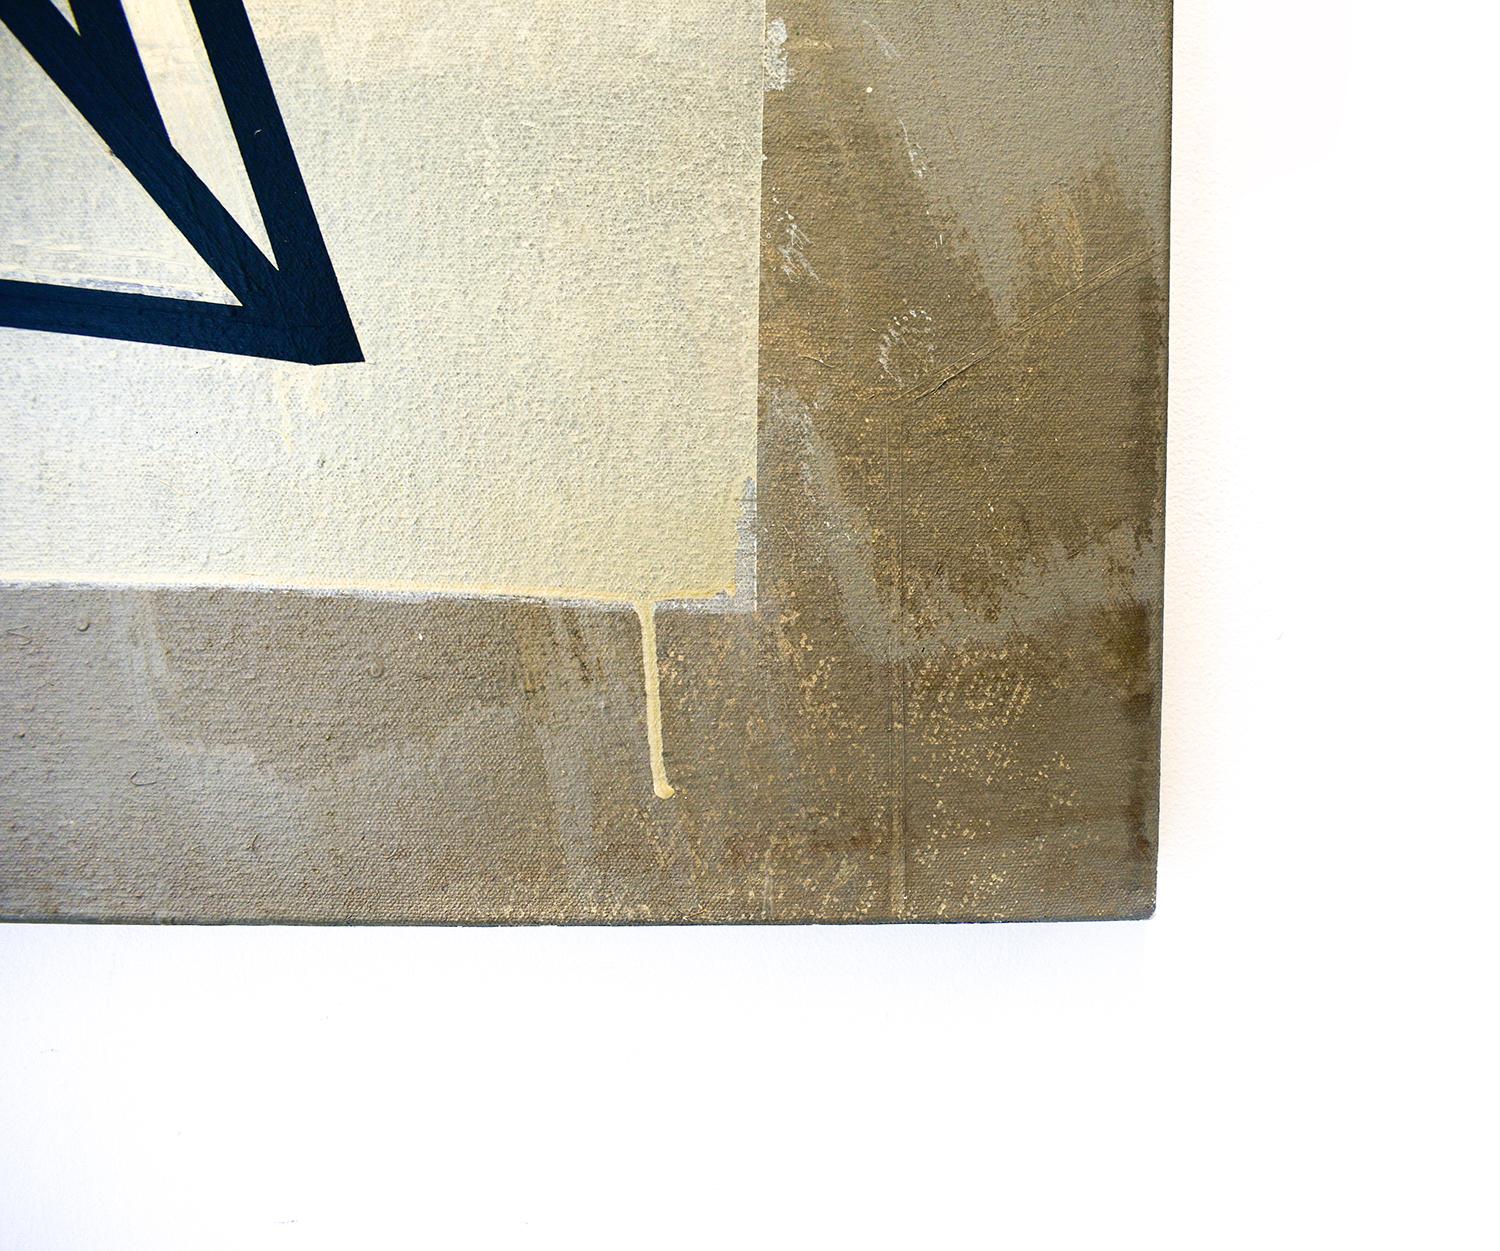 Permanently Temporary #2: Geometric & Gestural Abstract Painting in Earth Tones 2